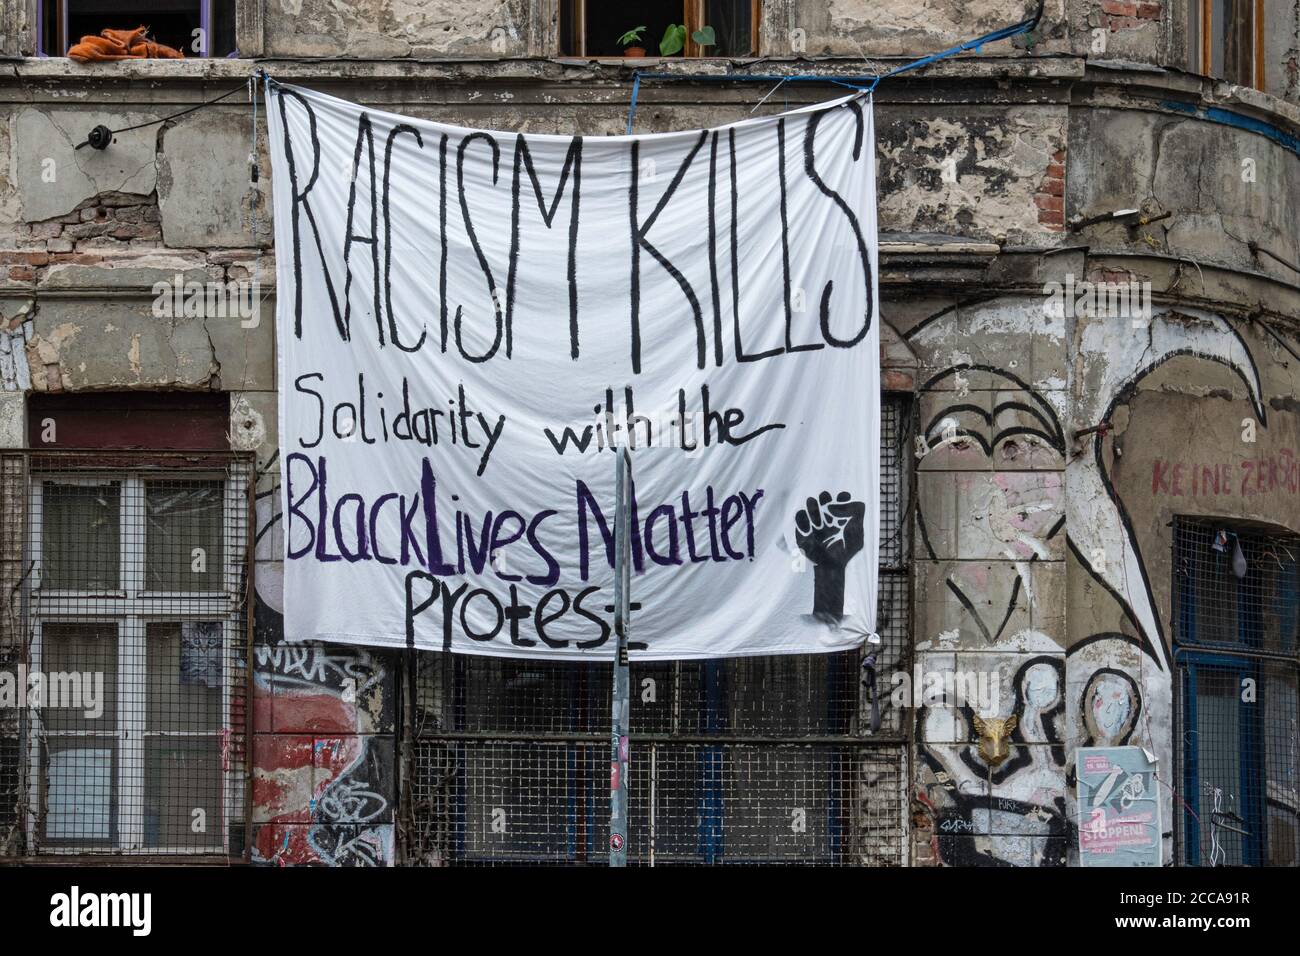 Berlin Mitte, Linienstrasse 206. Racism kills, Solidarity with Black Lives matter protest banner outside graffiti-covered Squat building Stock Photo